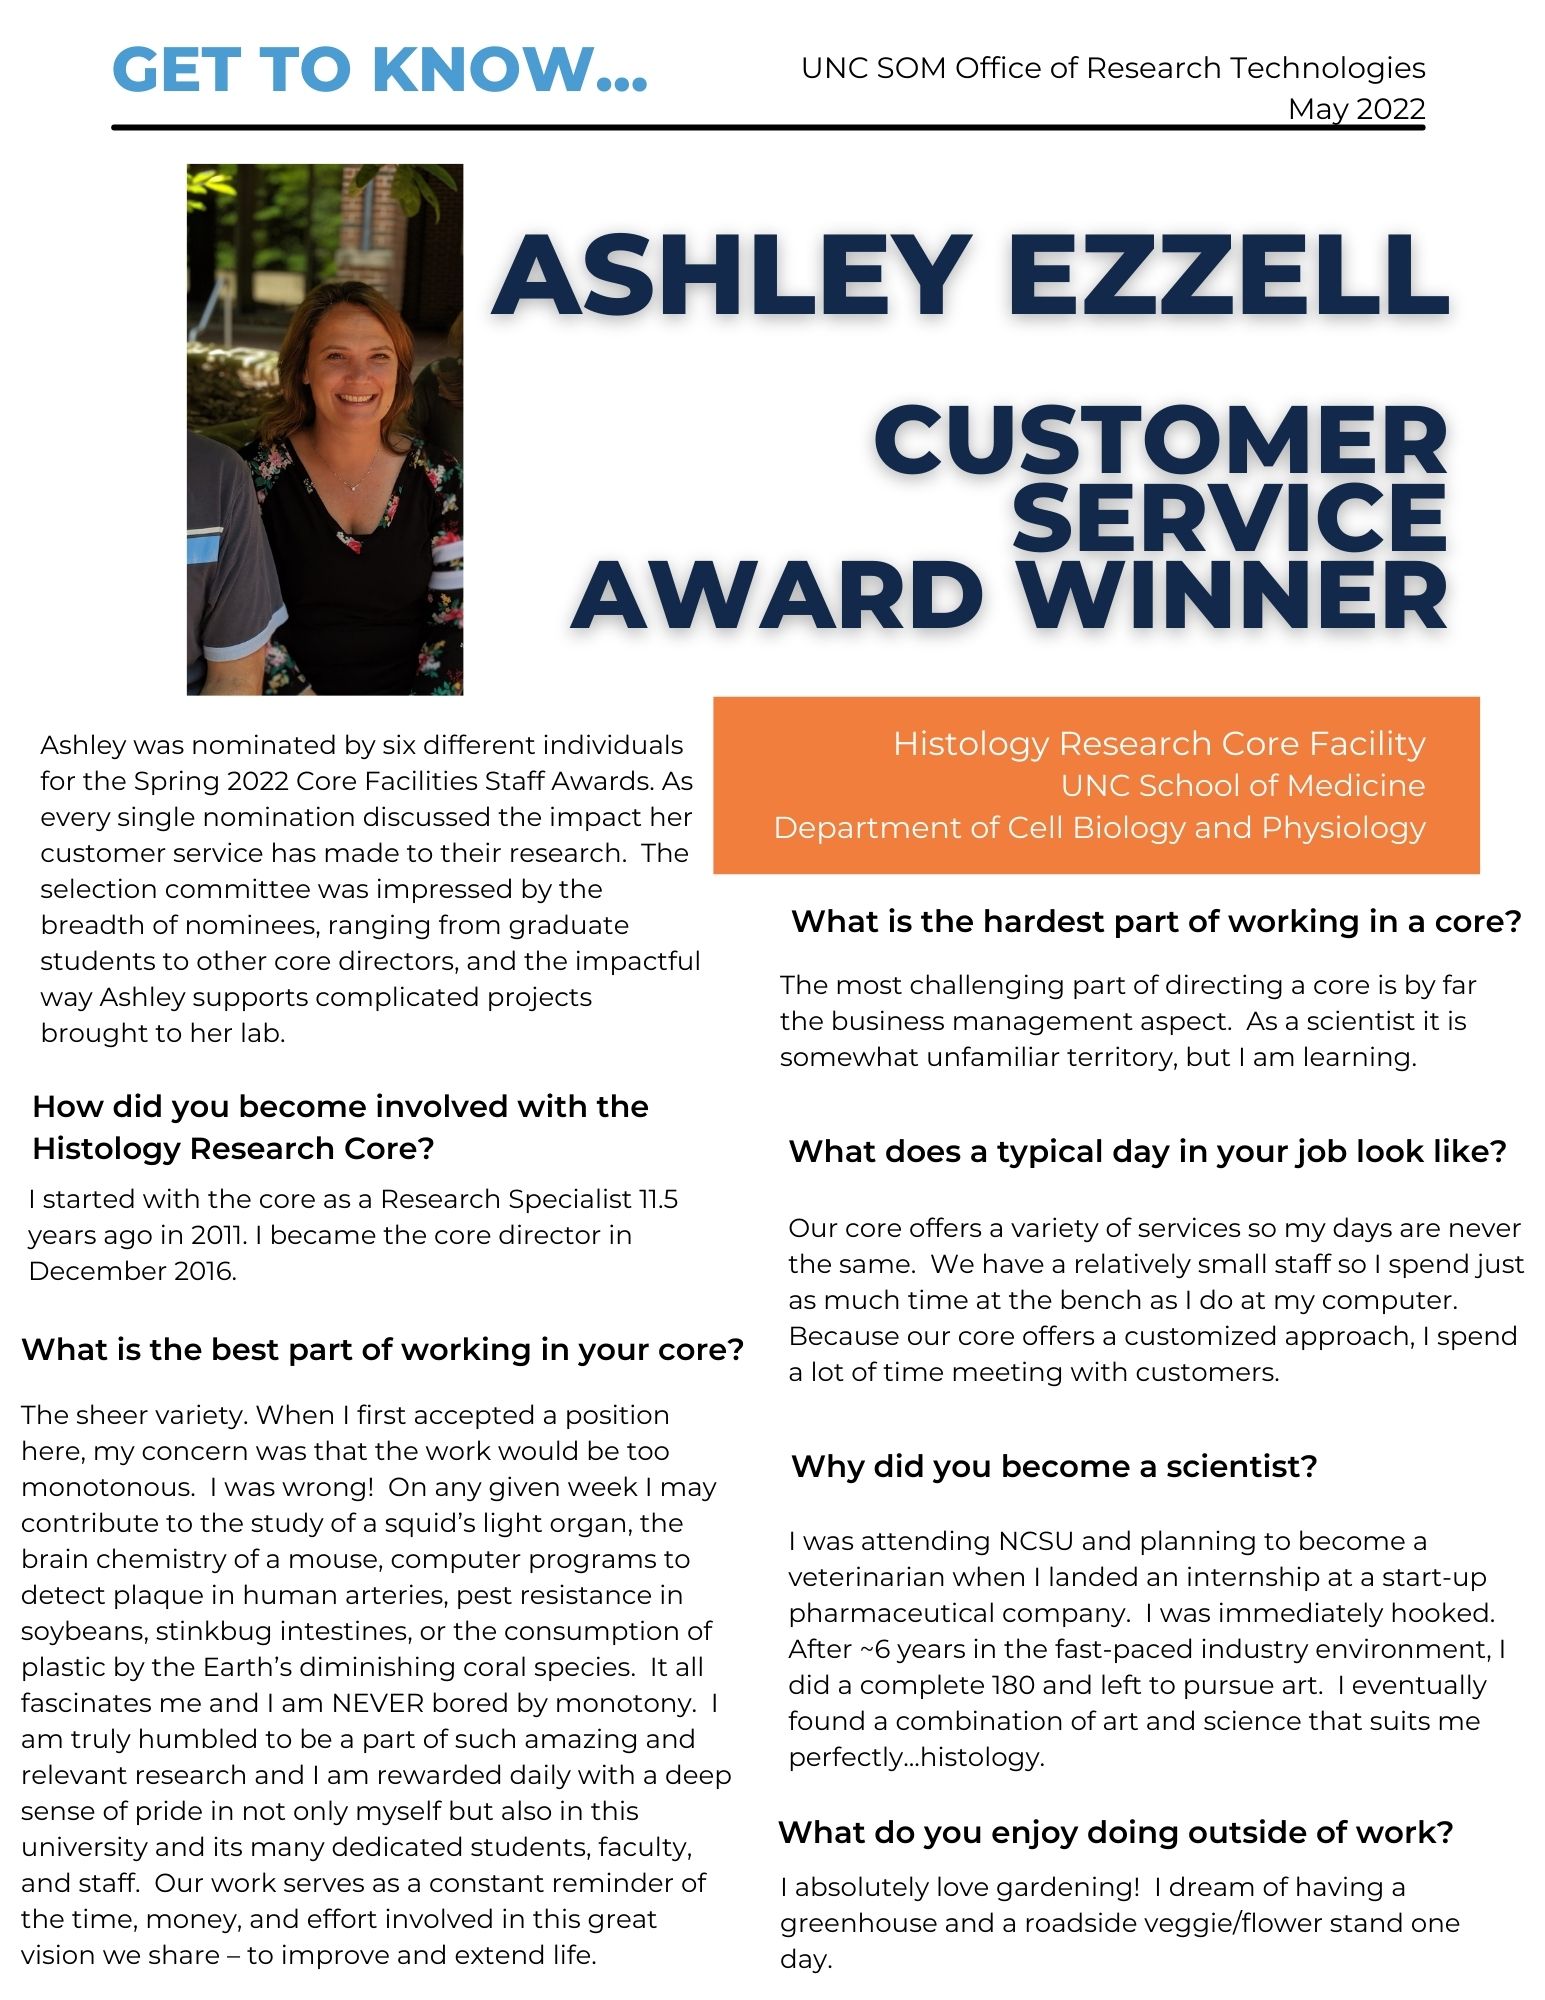 Get to Know Ashley Ezzell